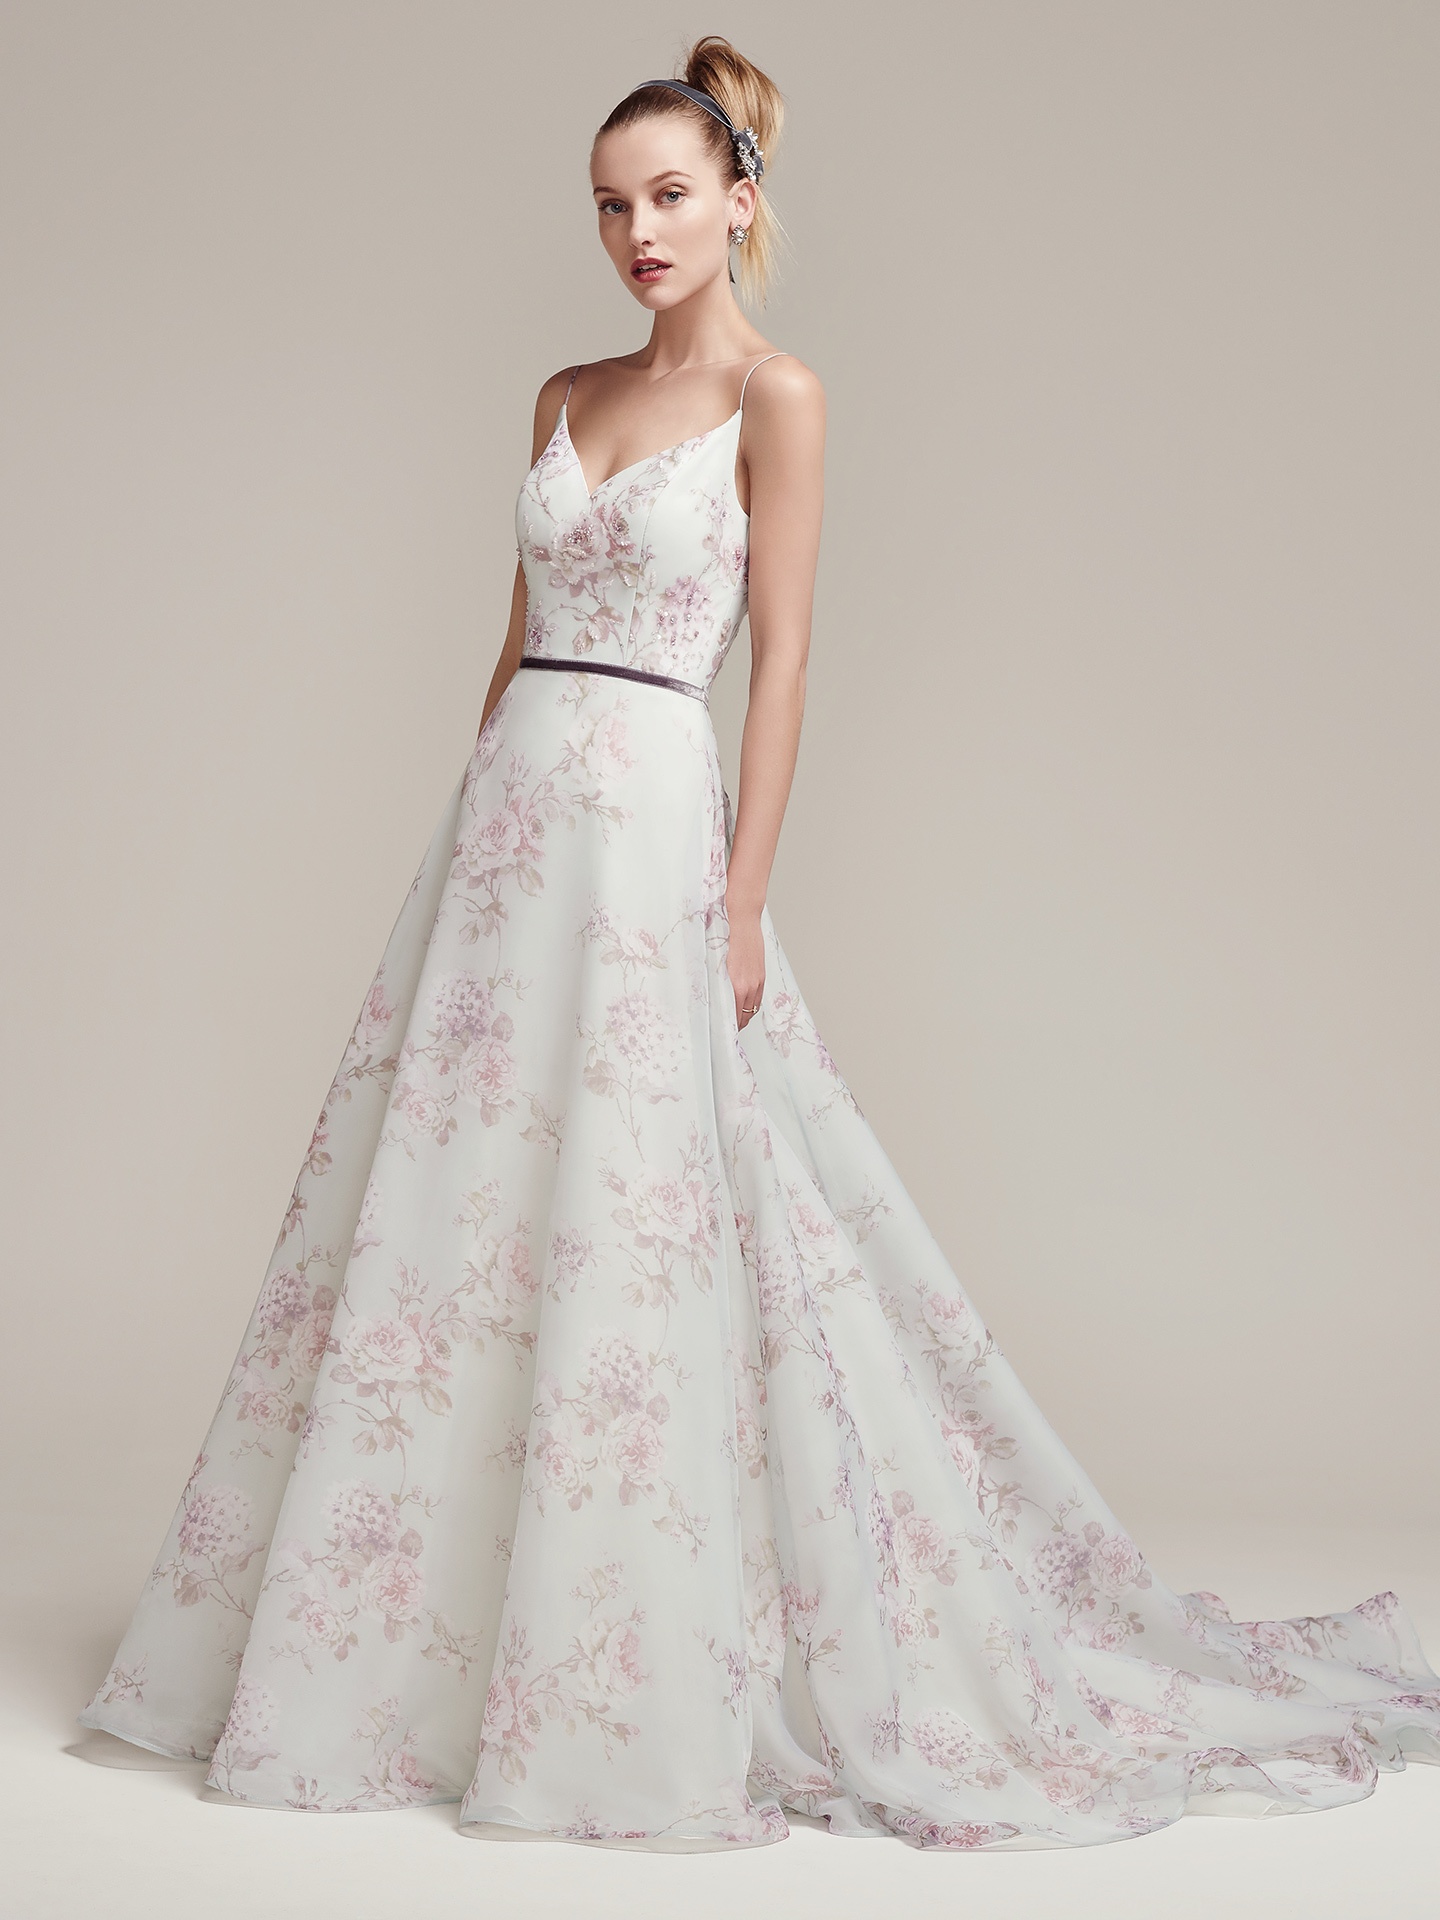 pastel and floral gowns - Kira by Sottero and Midgley